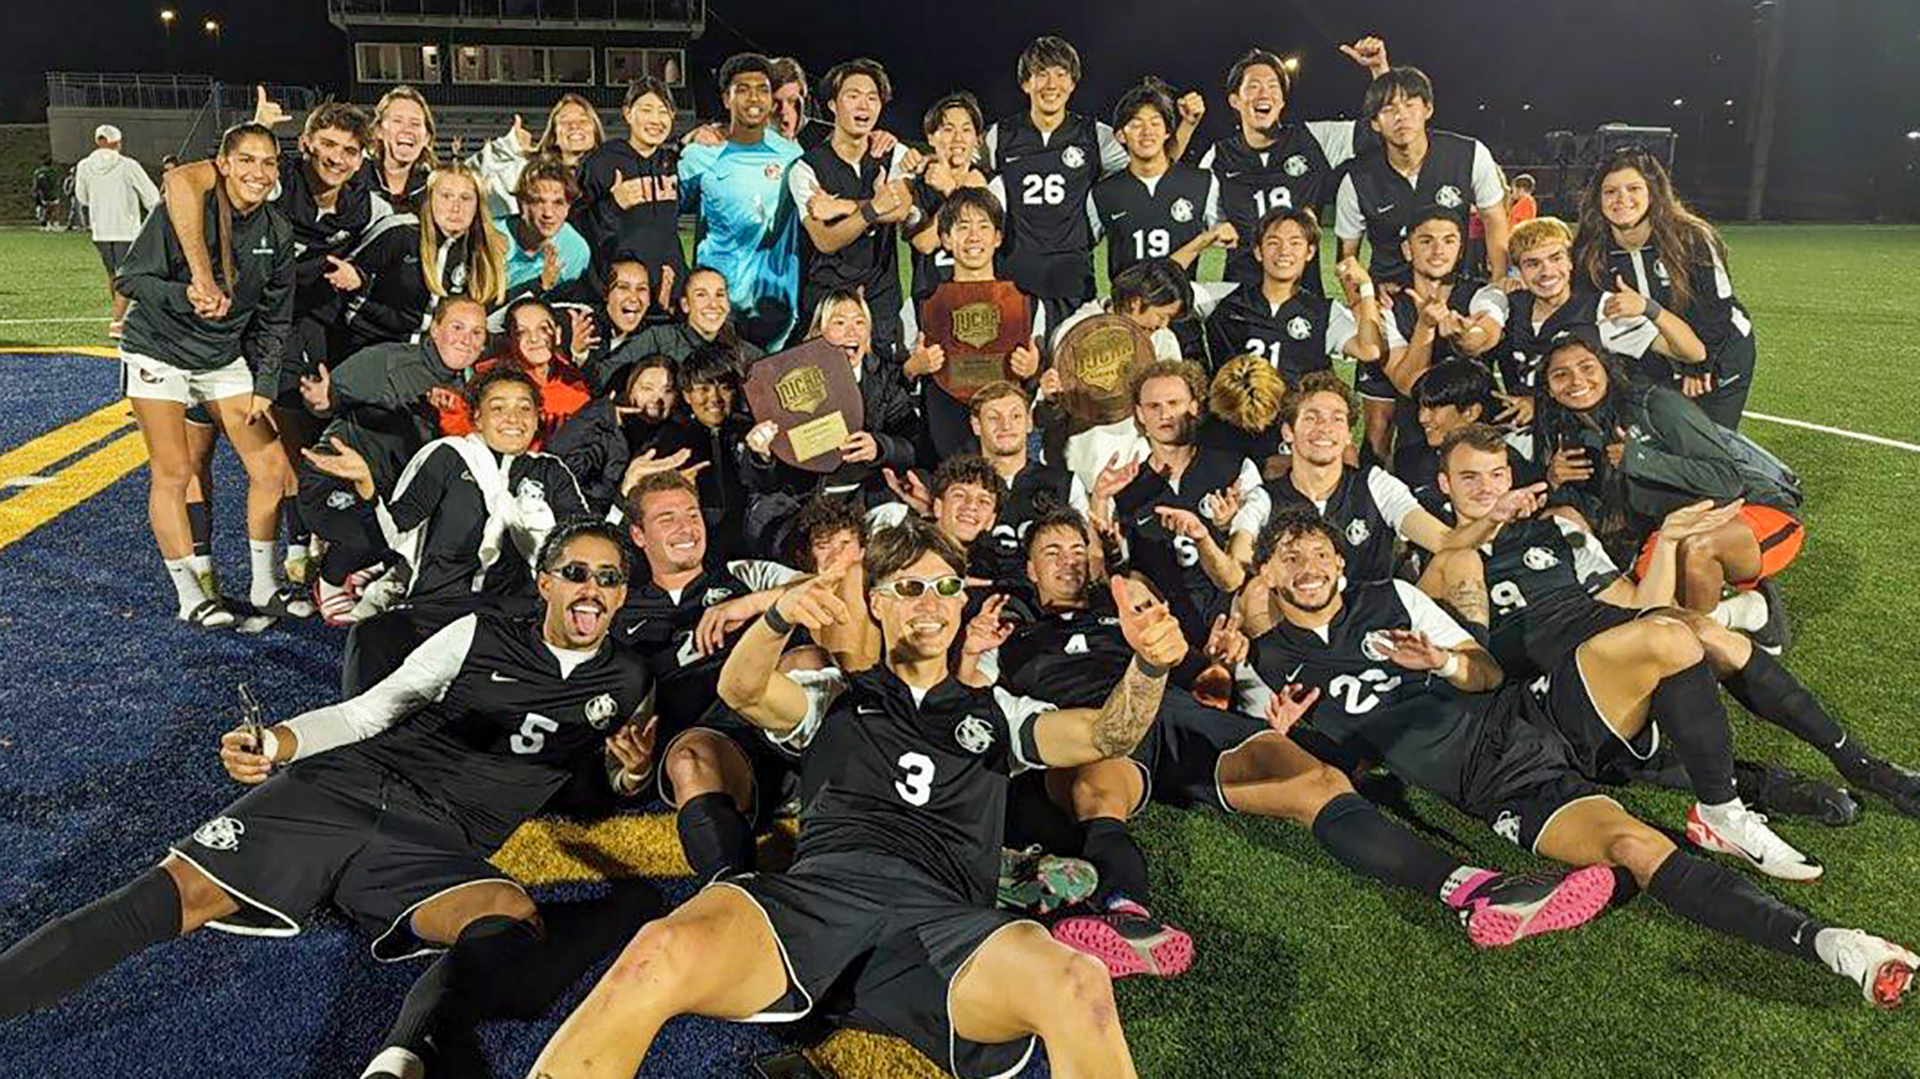 Three-peat! Tiger soccer team captures third straight district title with 2-1 win over Barton